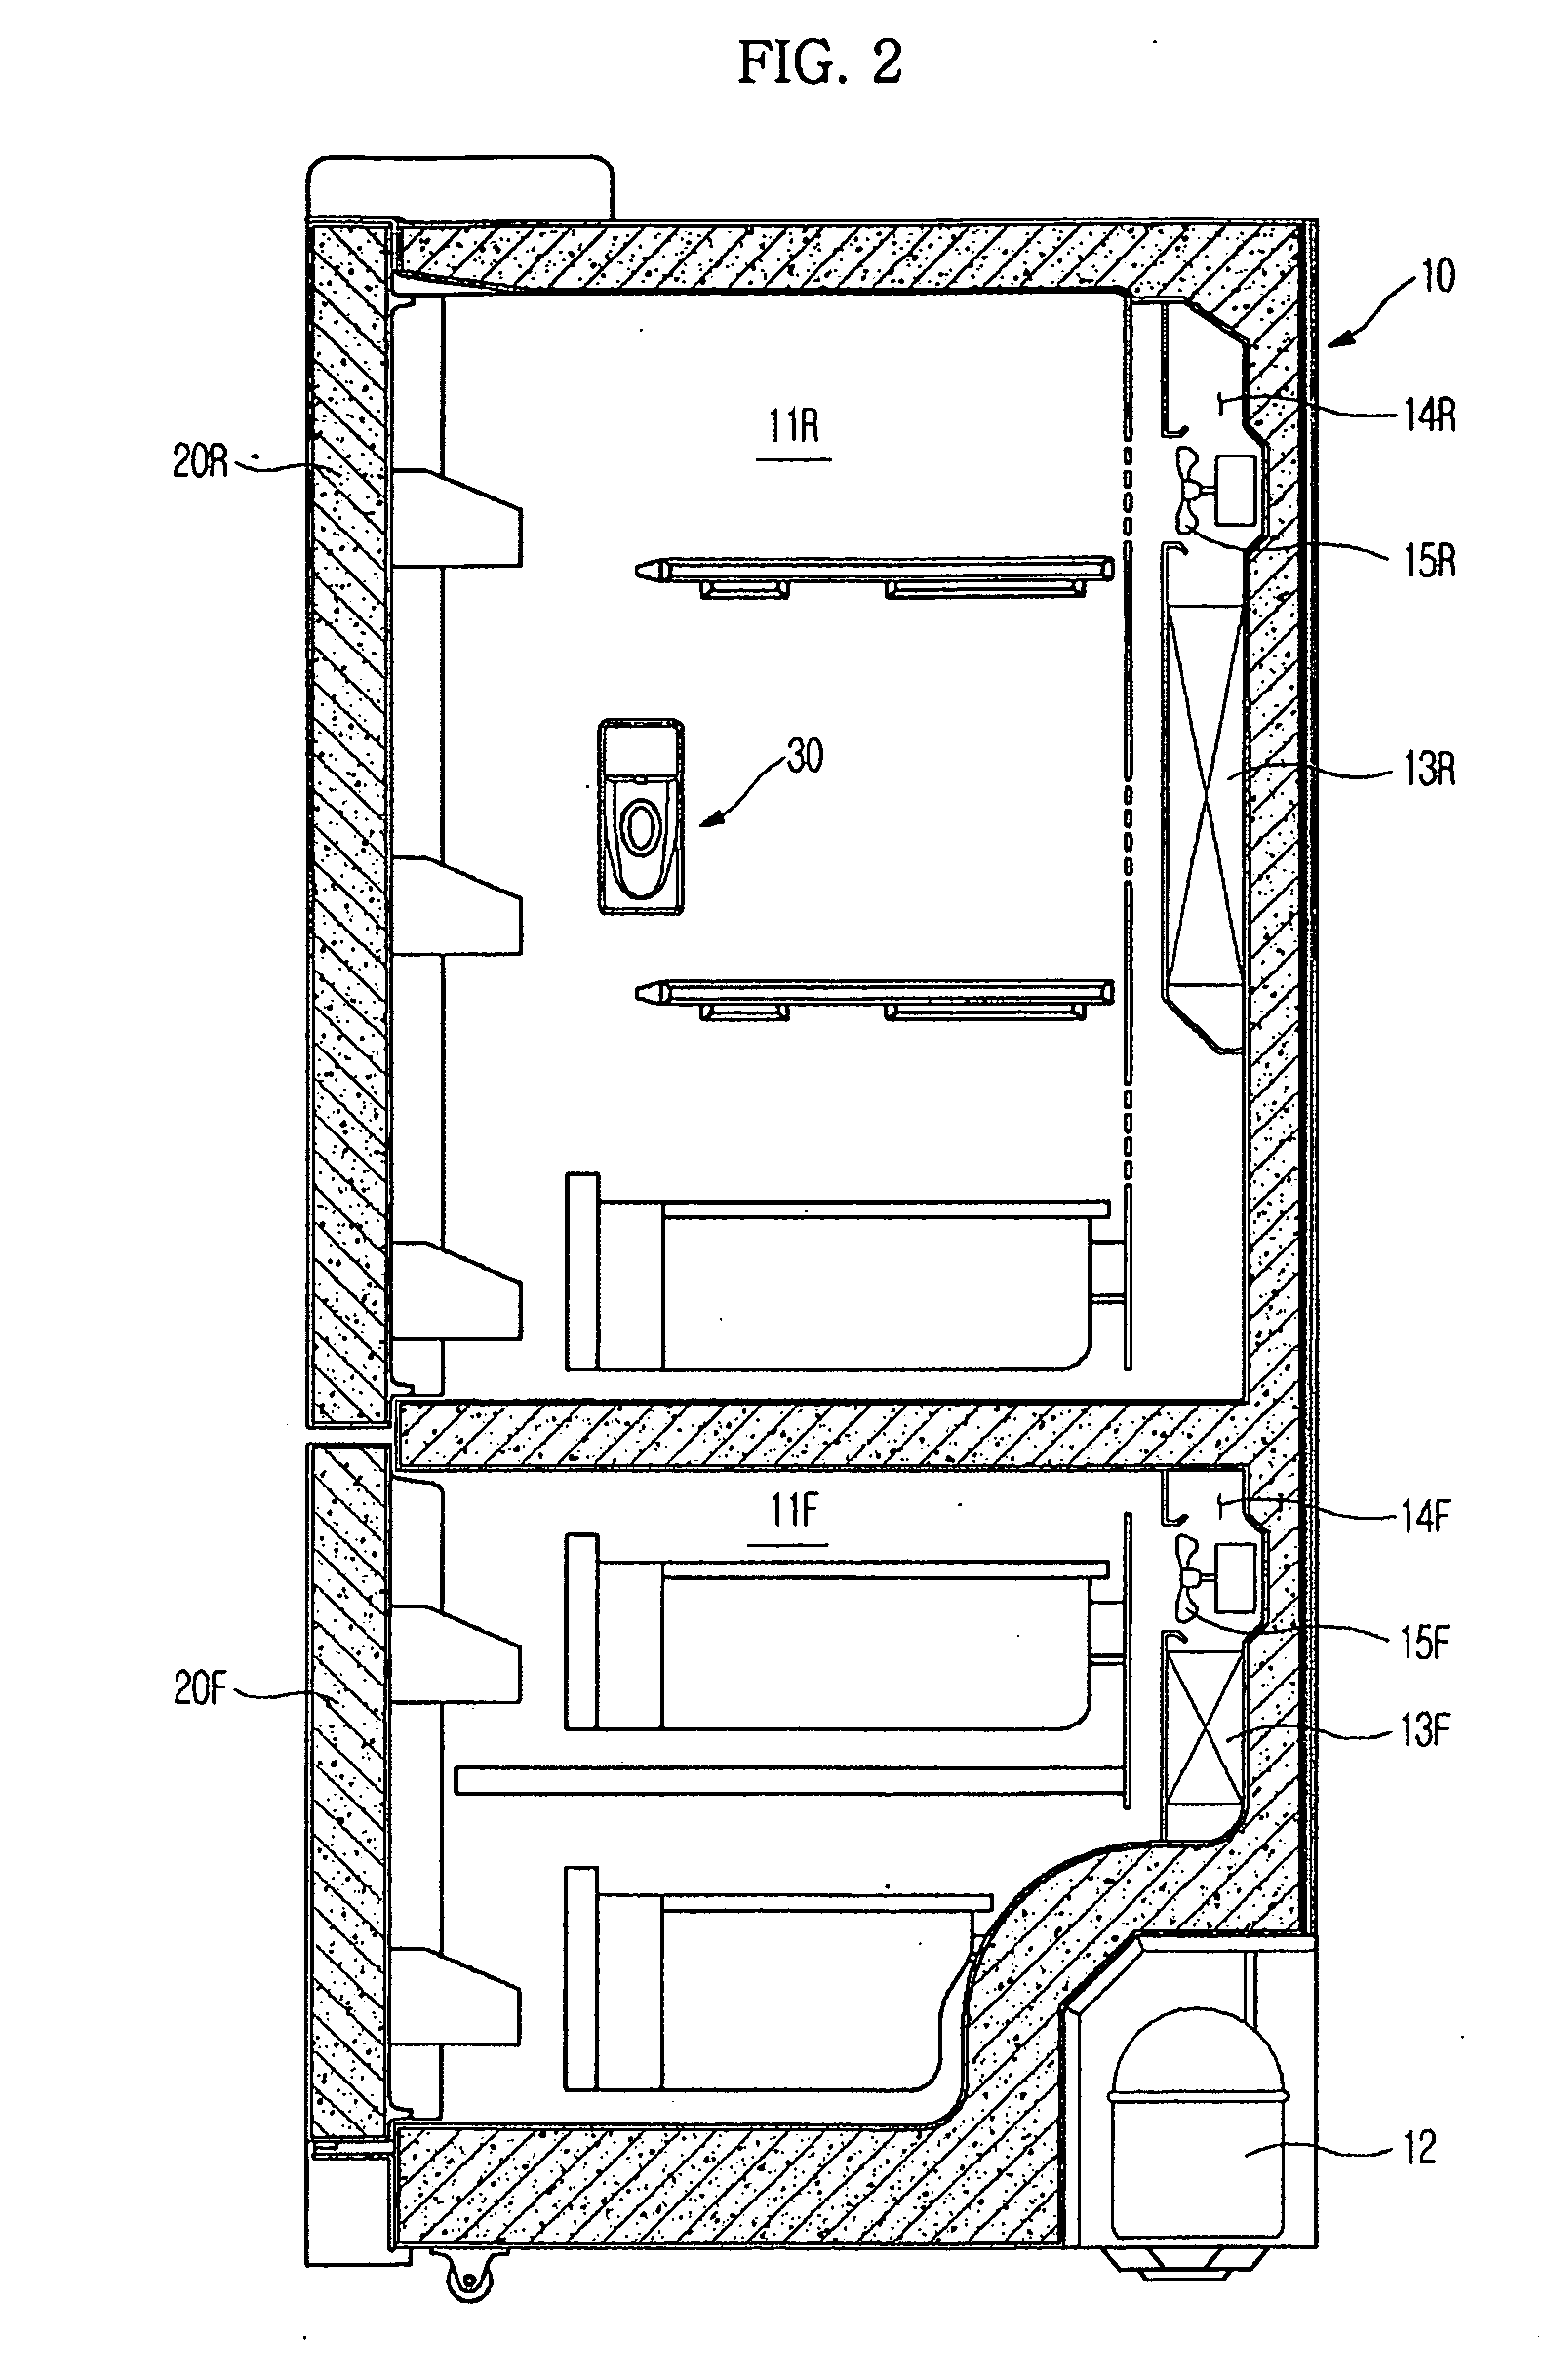 Refrigerator with water dispenser